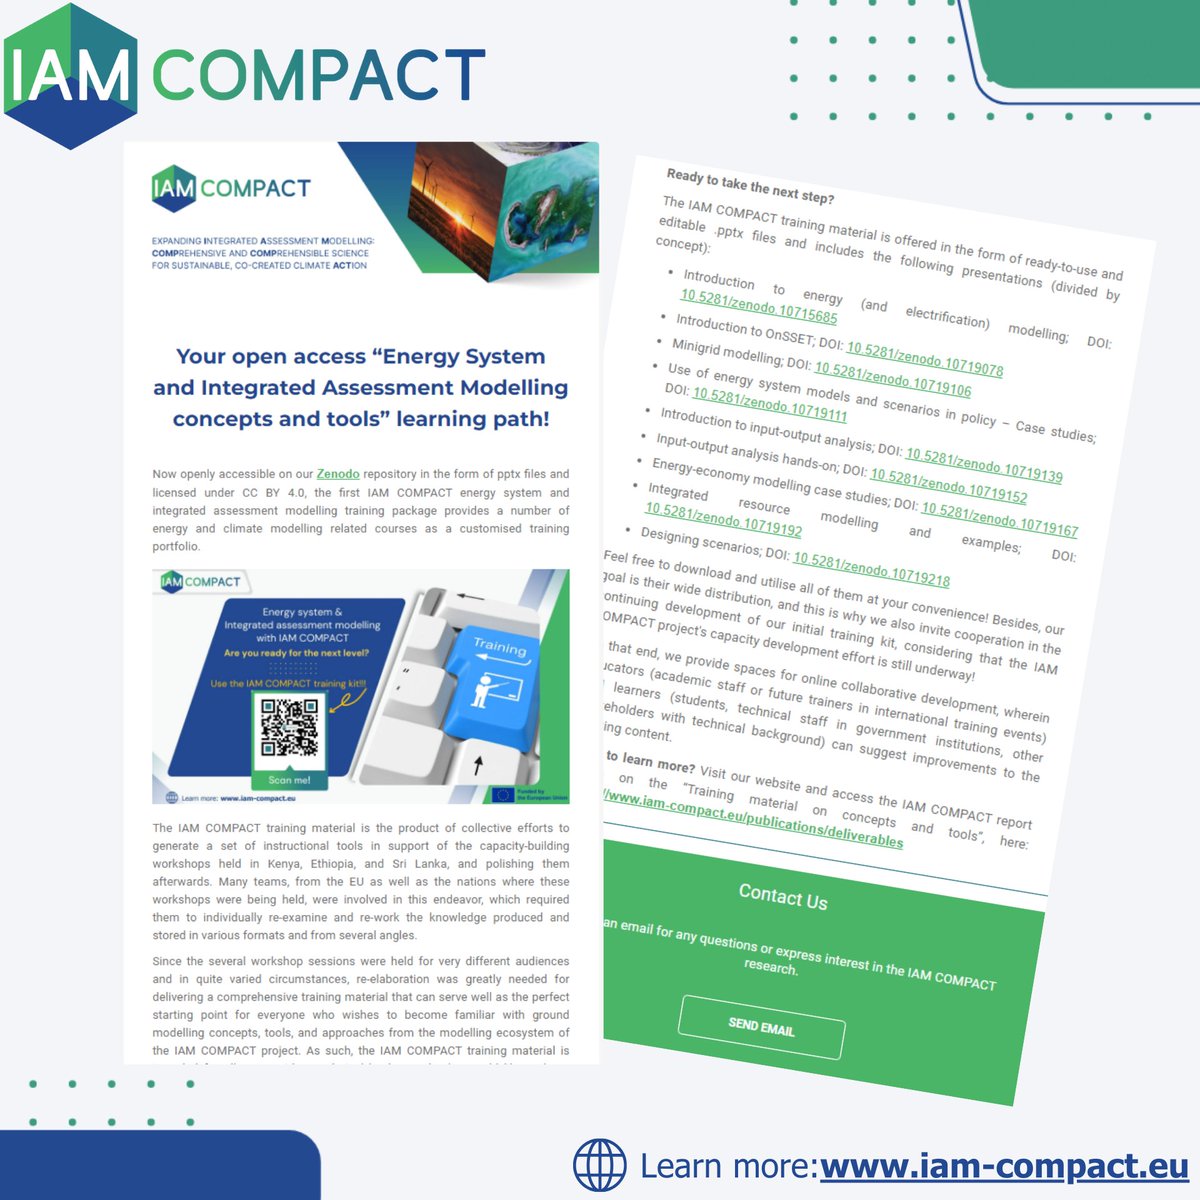 💡 Have you read our latest #pressrelease about the first @IAM_COMPACT #energysystem & integrated assessment modelling (#IAM) training package? 
Access it now & download it here: preview.mailerlite.com/f3u2t2k0g6 

#iamcompact #trainingmaterial #climatechange #energymodelling